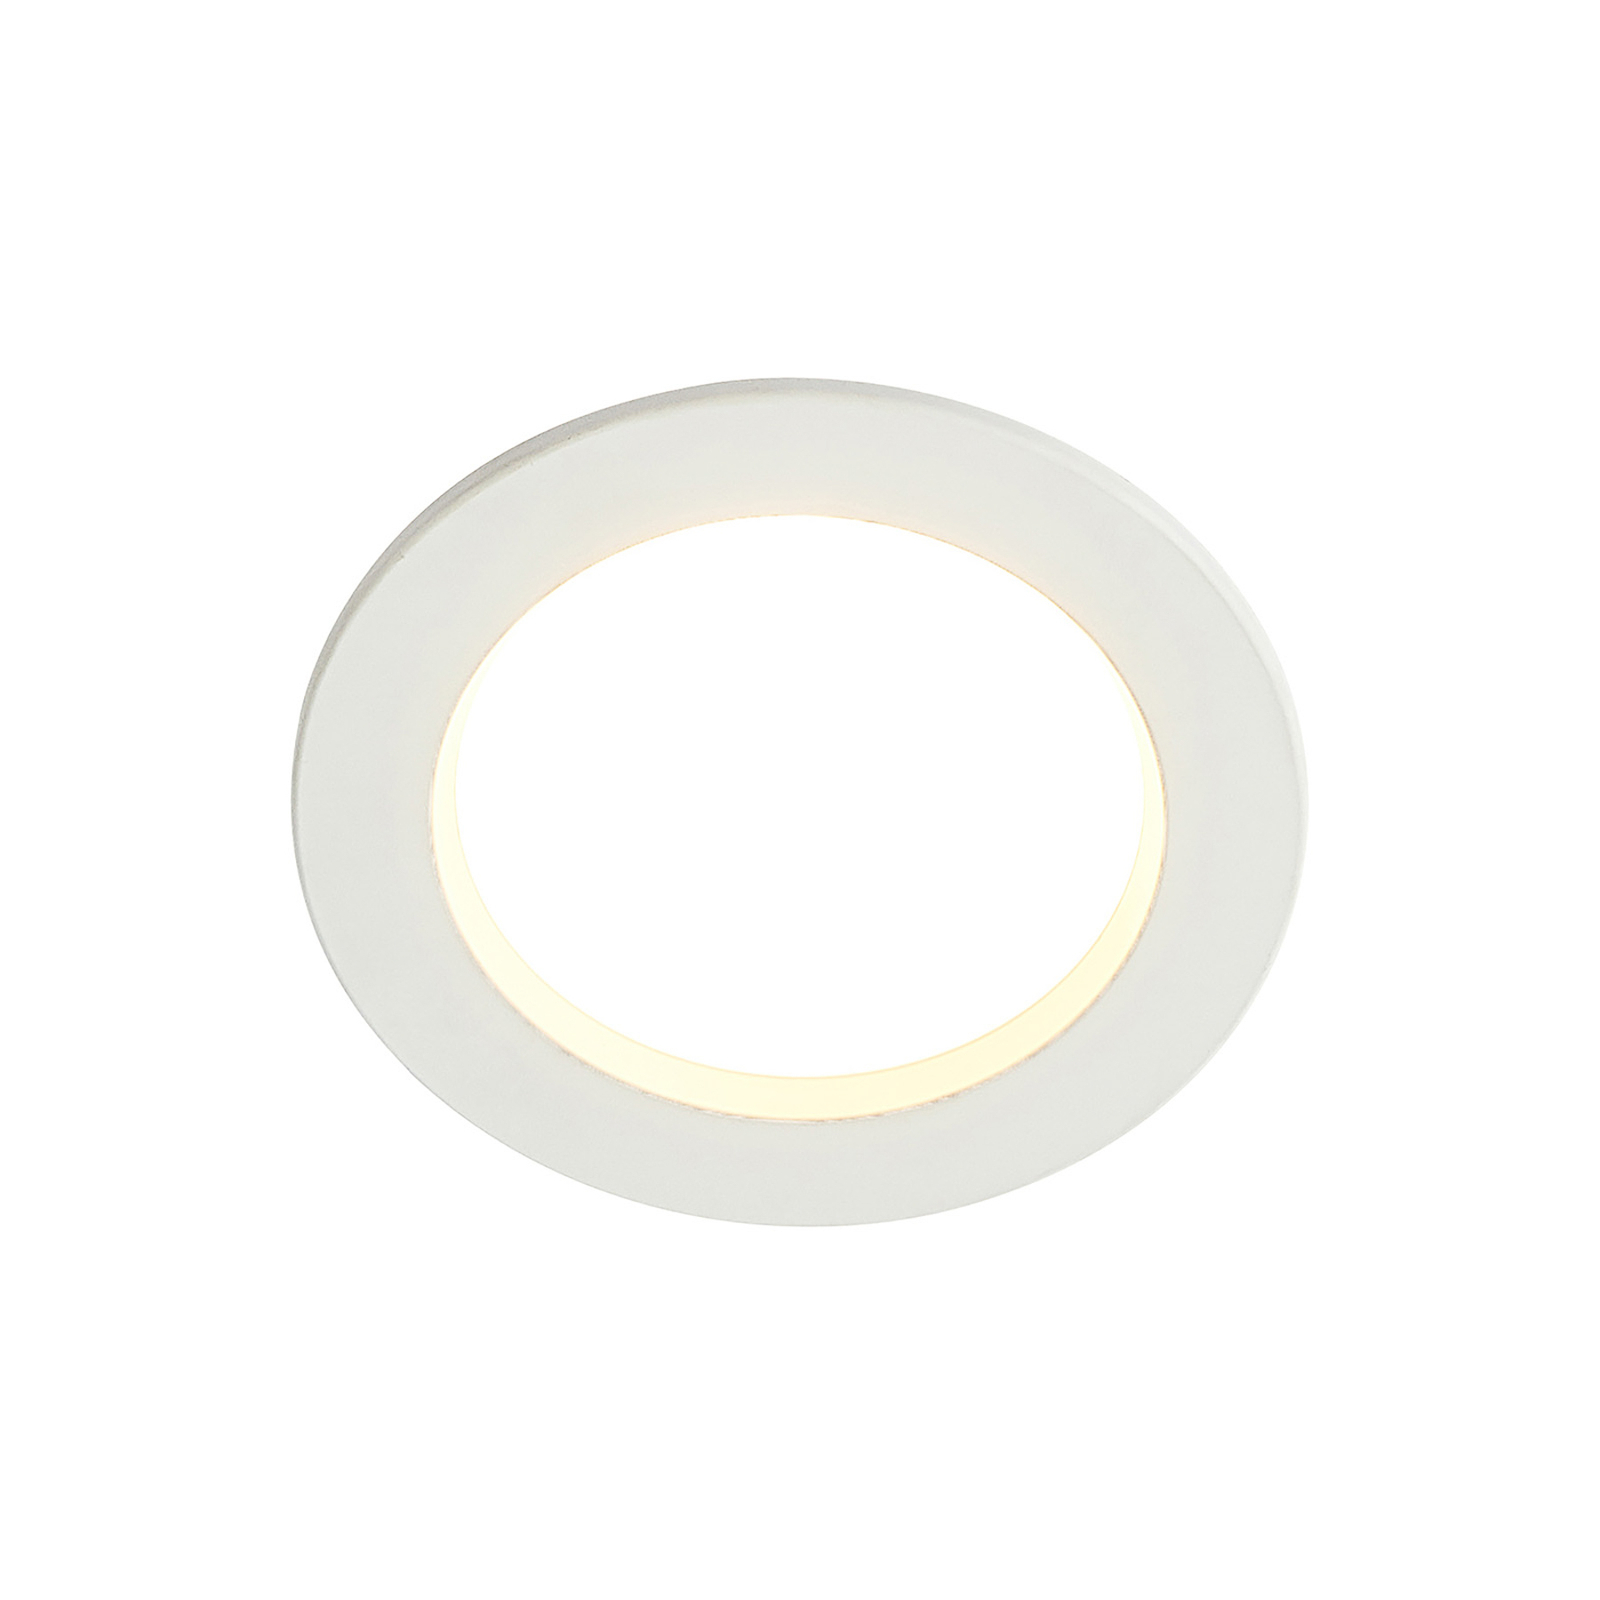 Arcchio LED recessed light Milaine, white, dimmable, set of 10